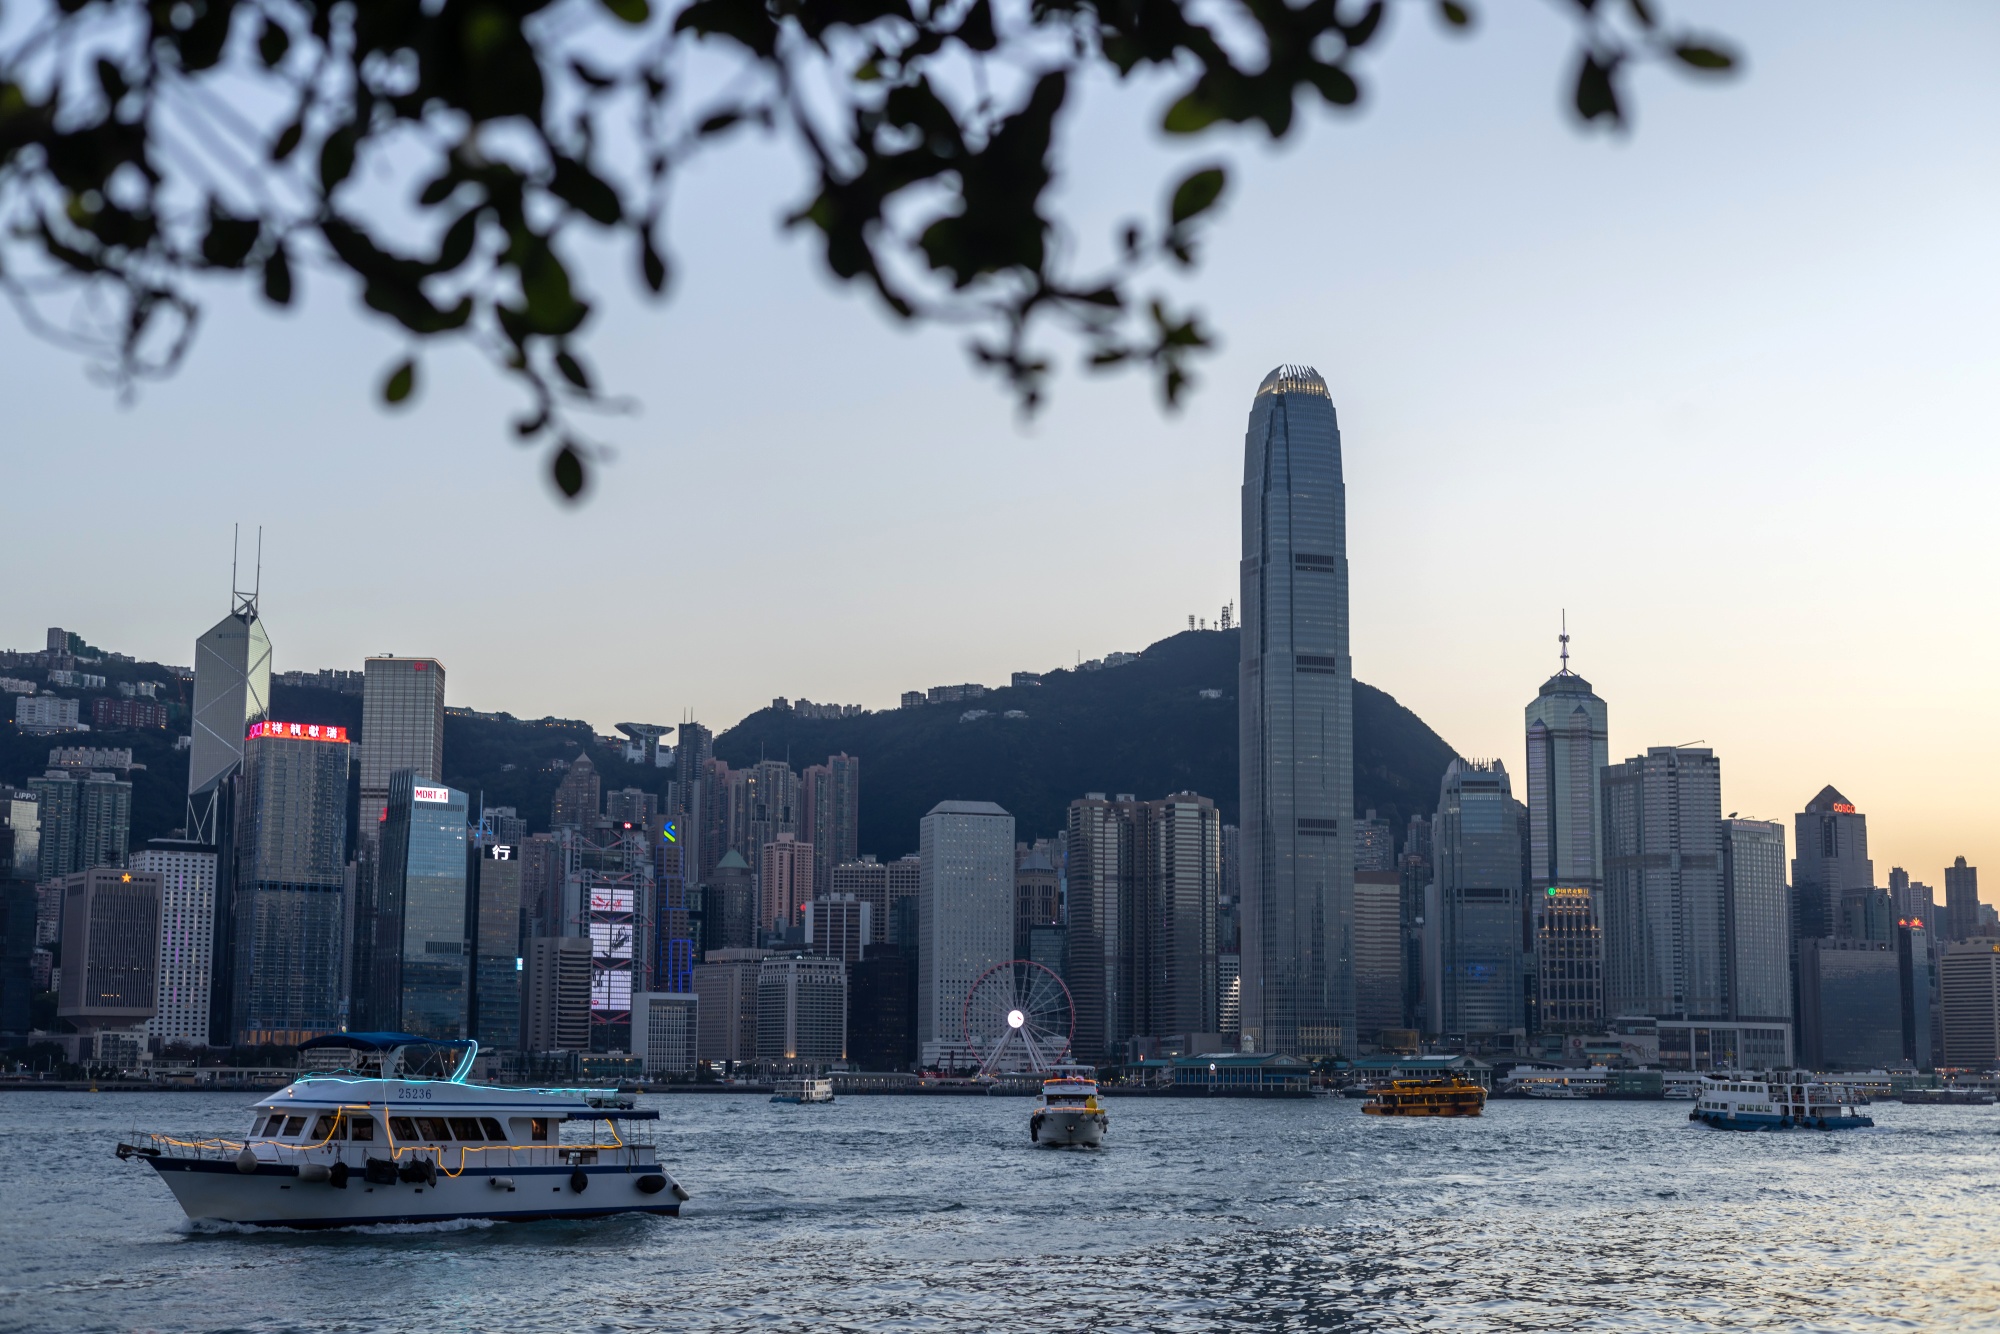 General Views of Hong Kong As City Has 2,700 Single Family Offices in Wealth Hub Boost